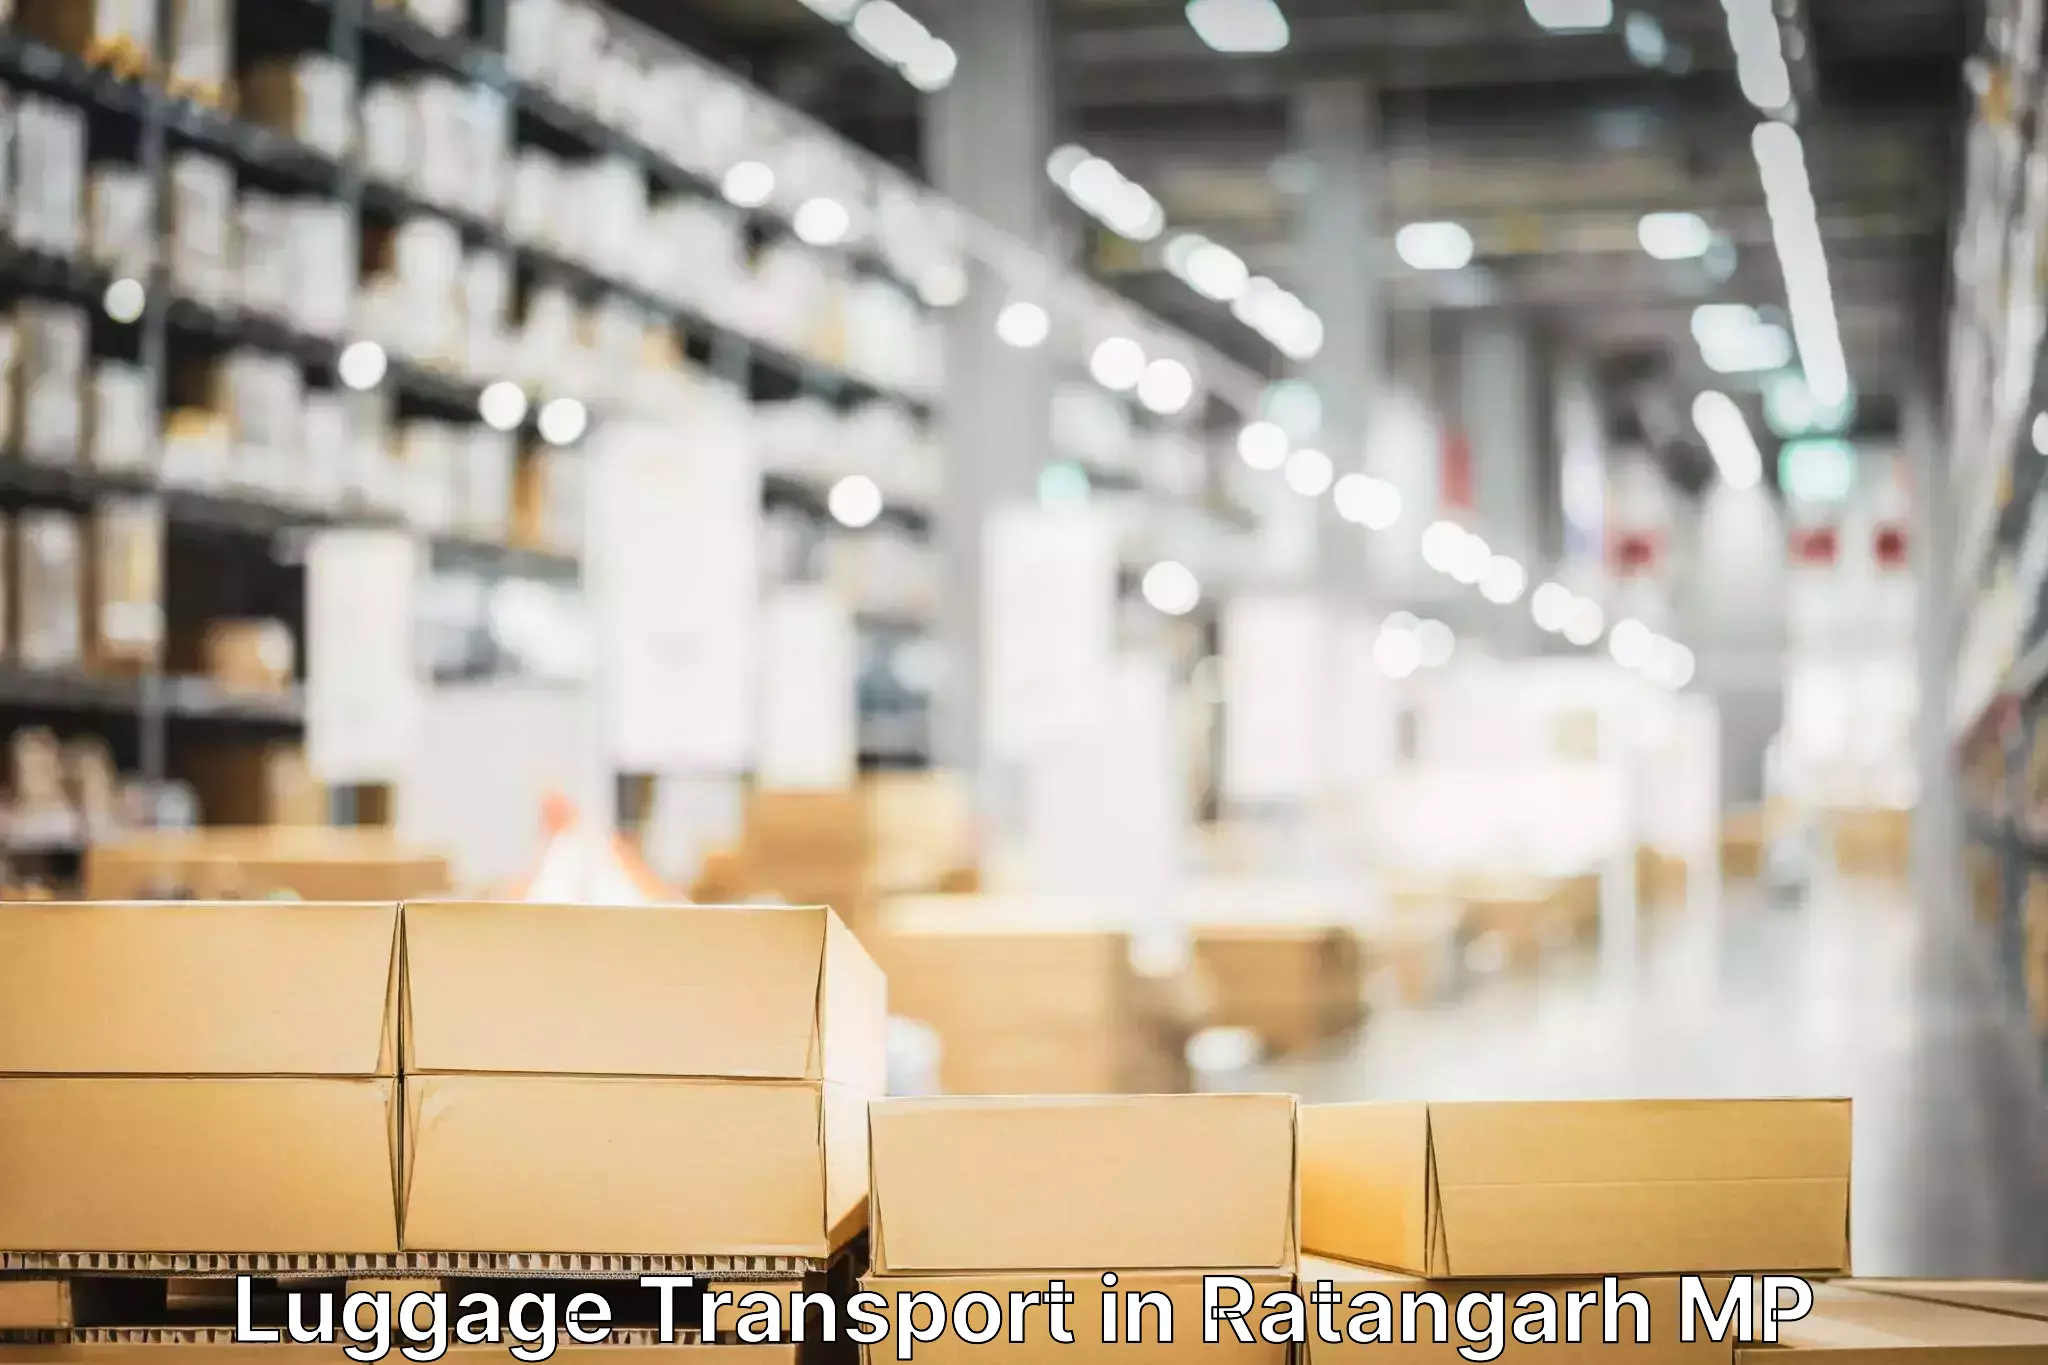 Luggage shipping trends in Ratangarh MP